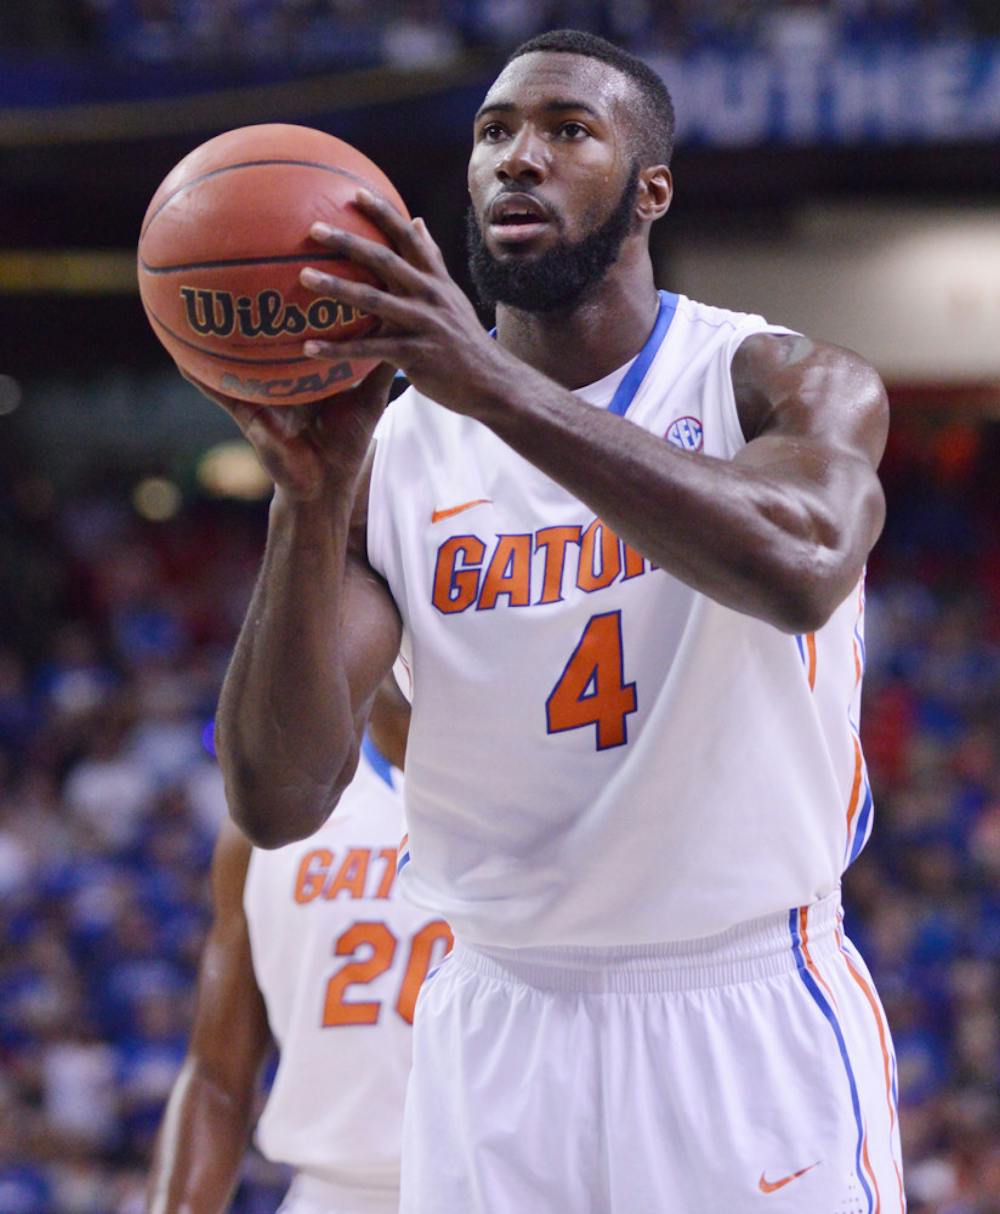 <p align="justify">Patric Young attempts a free throw during Florida’s 61-60 win against Kentucky on Sunday in the Georgia Dome in Atlanta.</p>